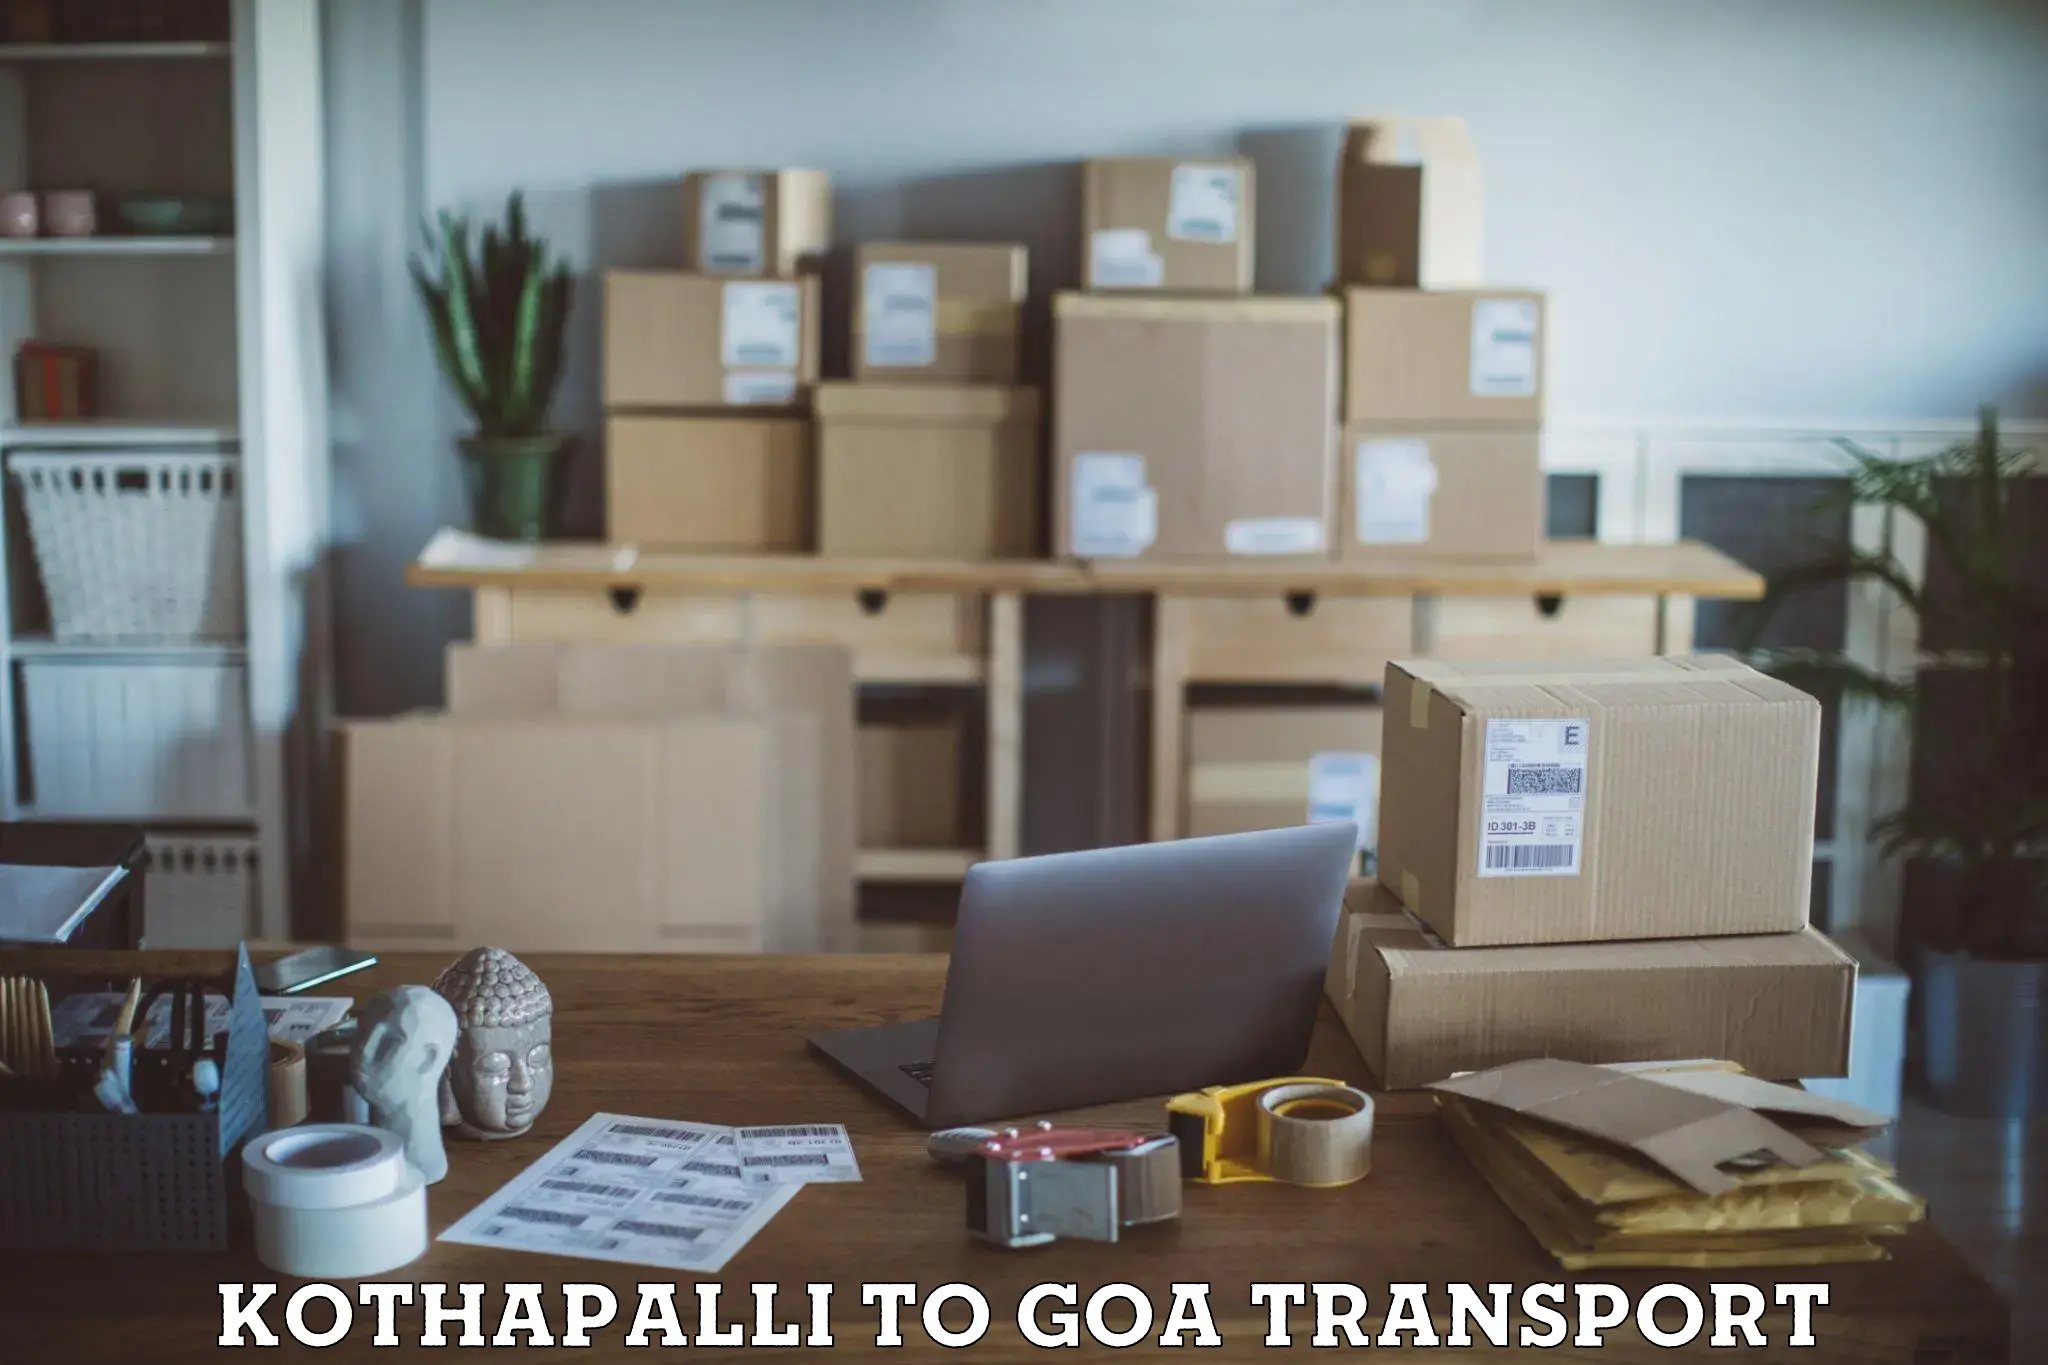 Daily transport service Kothapalli to South Goa